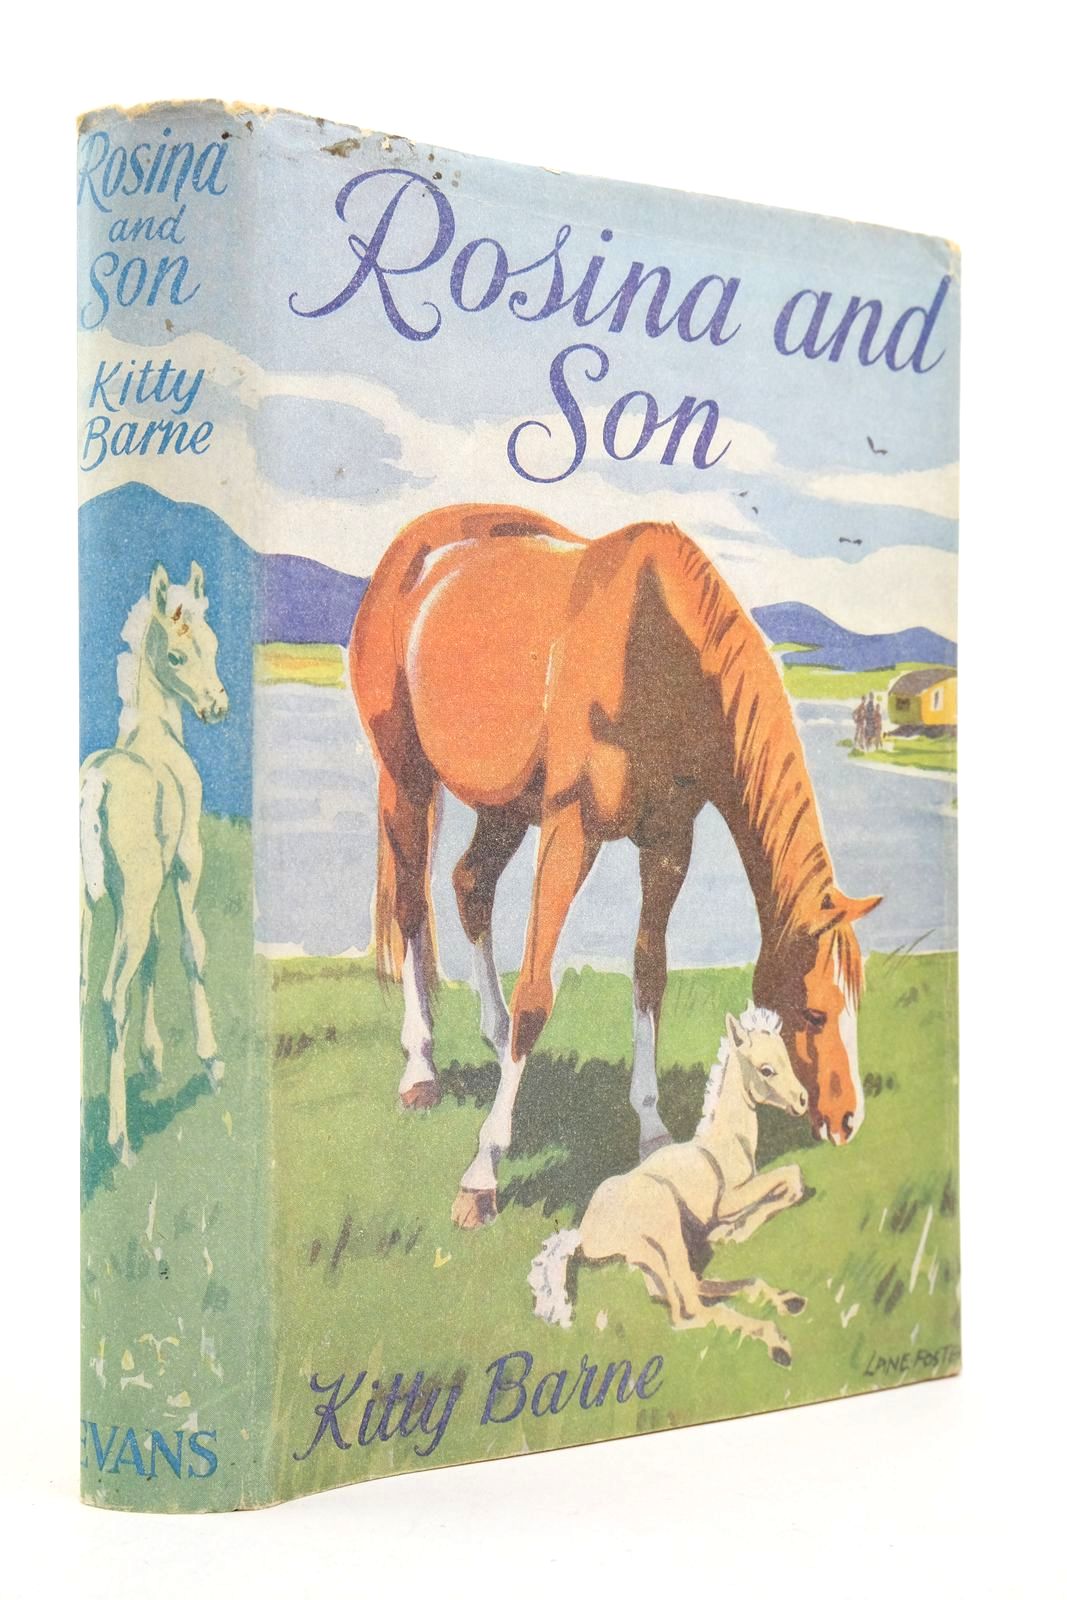 Photo of ROSINA AND SON- Stock Number: 2139969